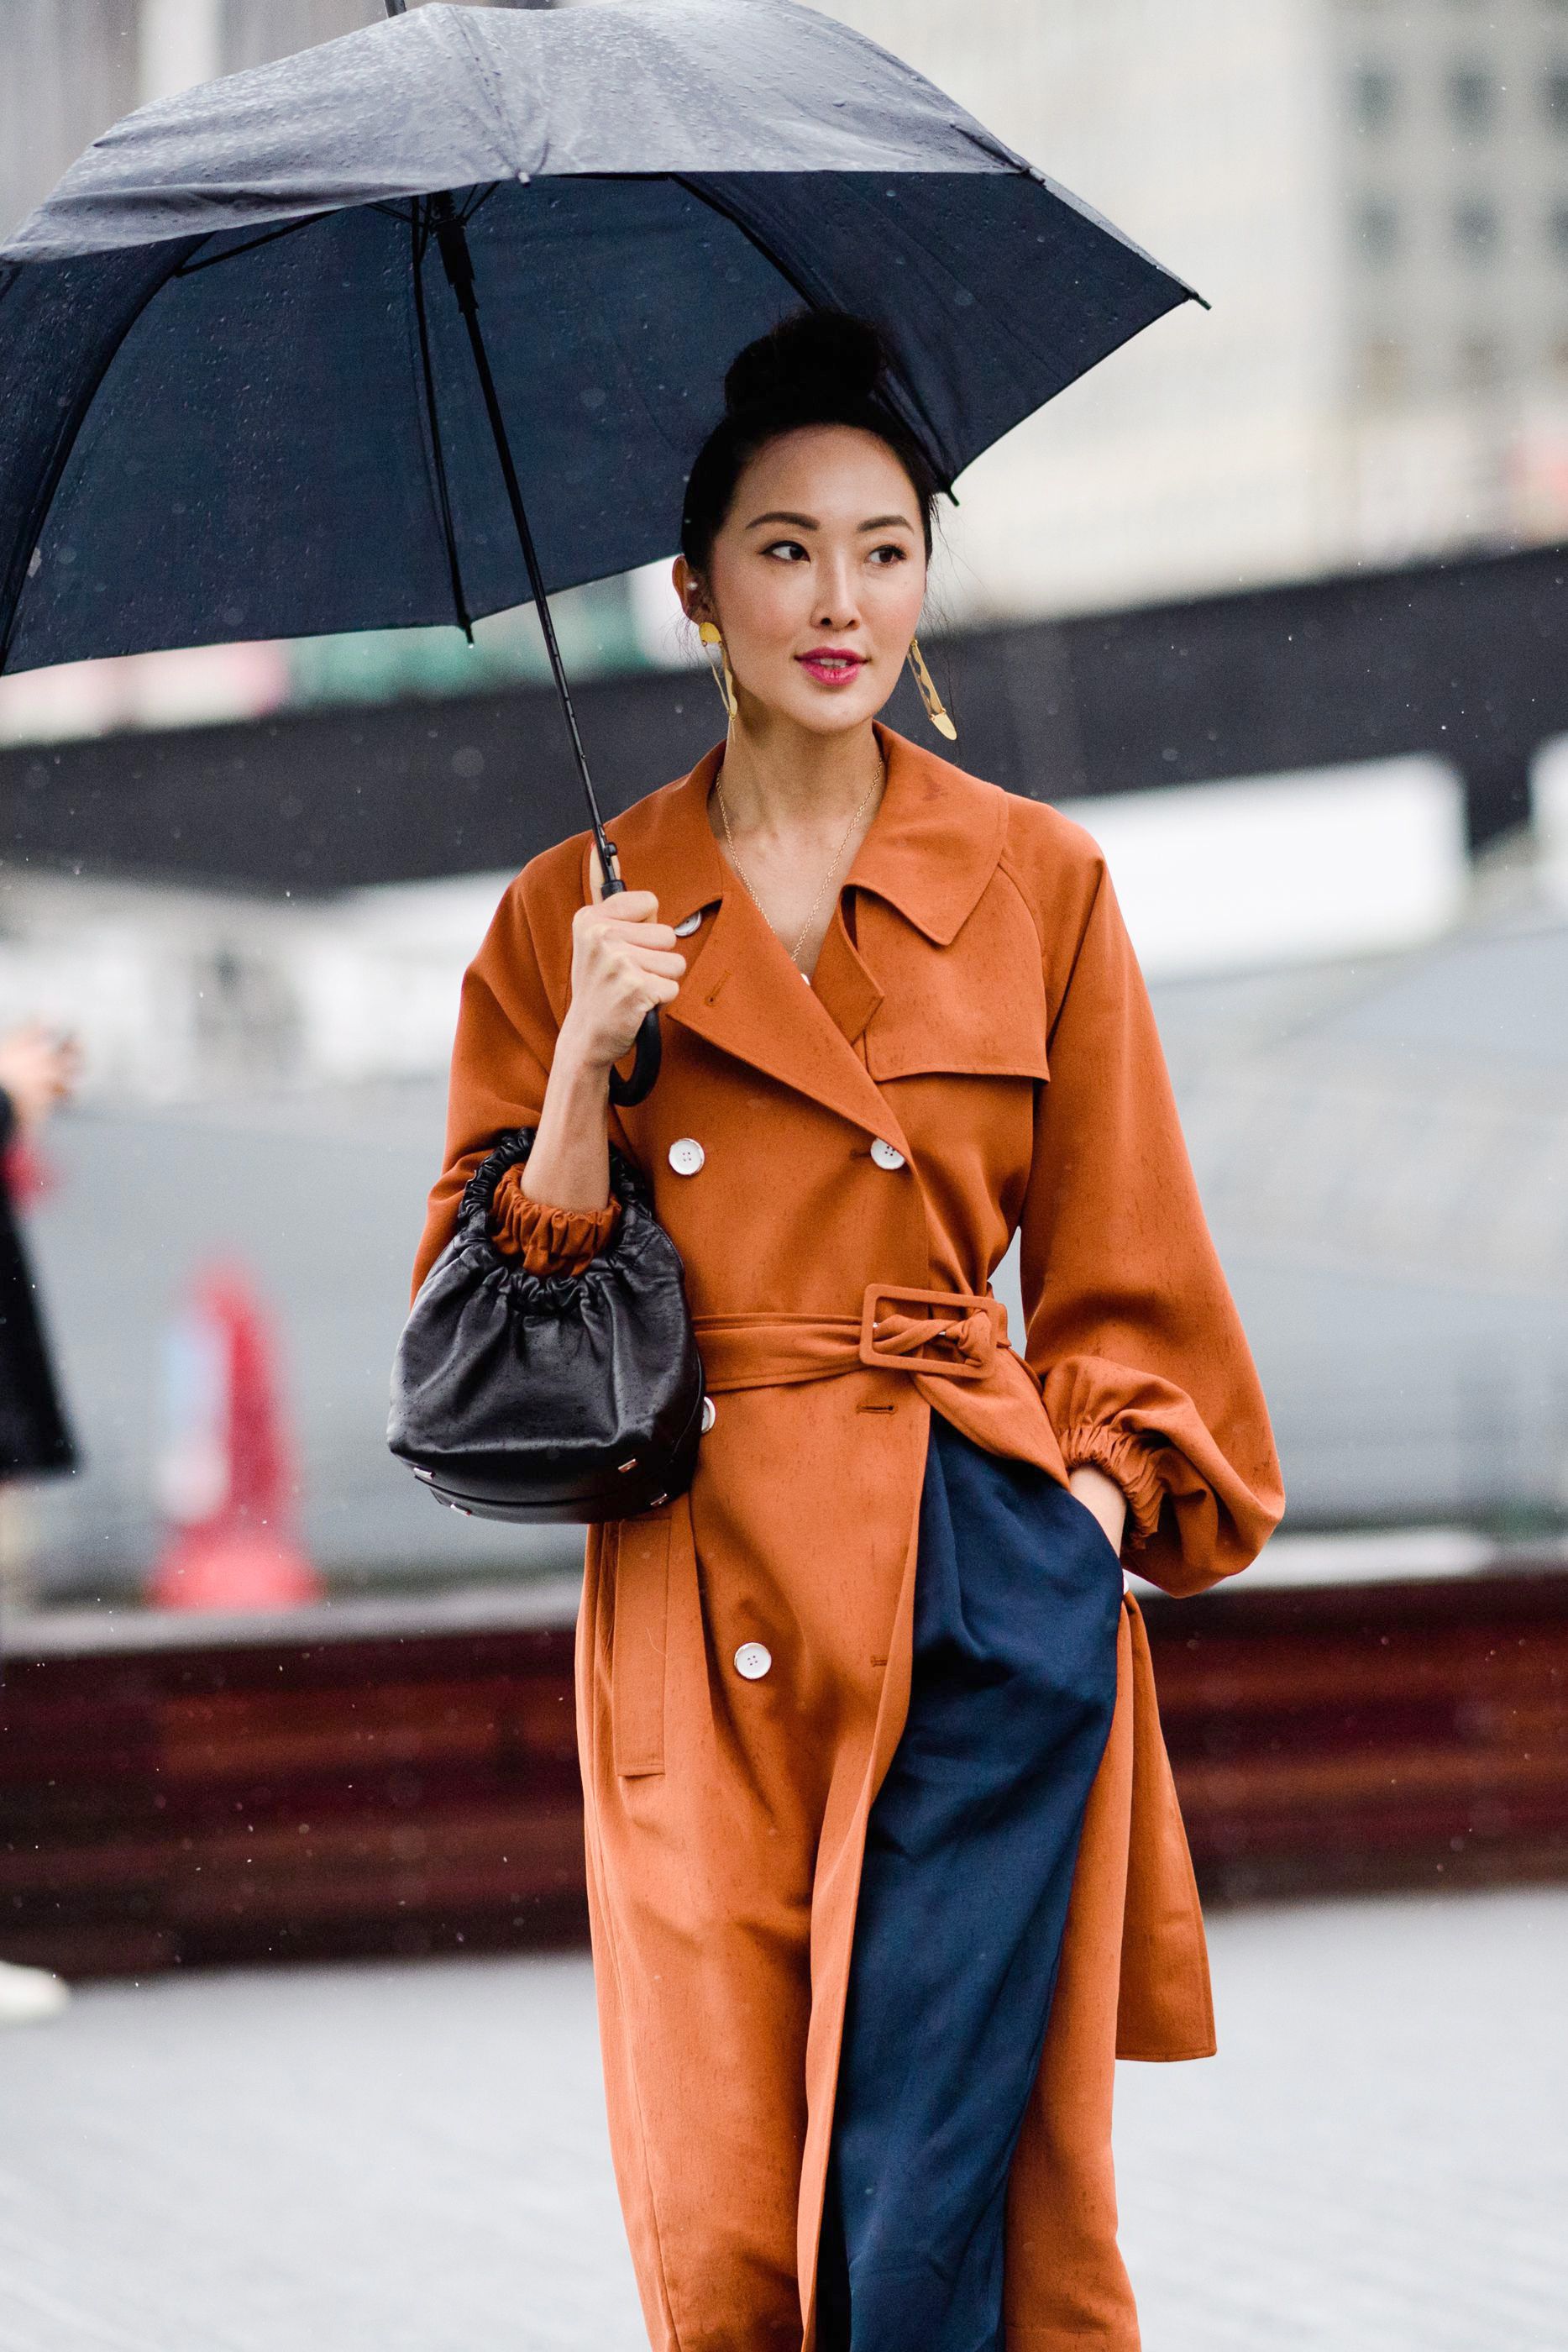 12 Cute Rainy Day Outfit Ideas 2018 - What To Wear In The Rain This